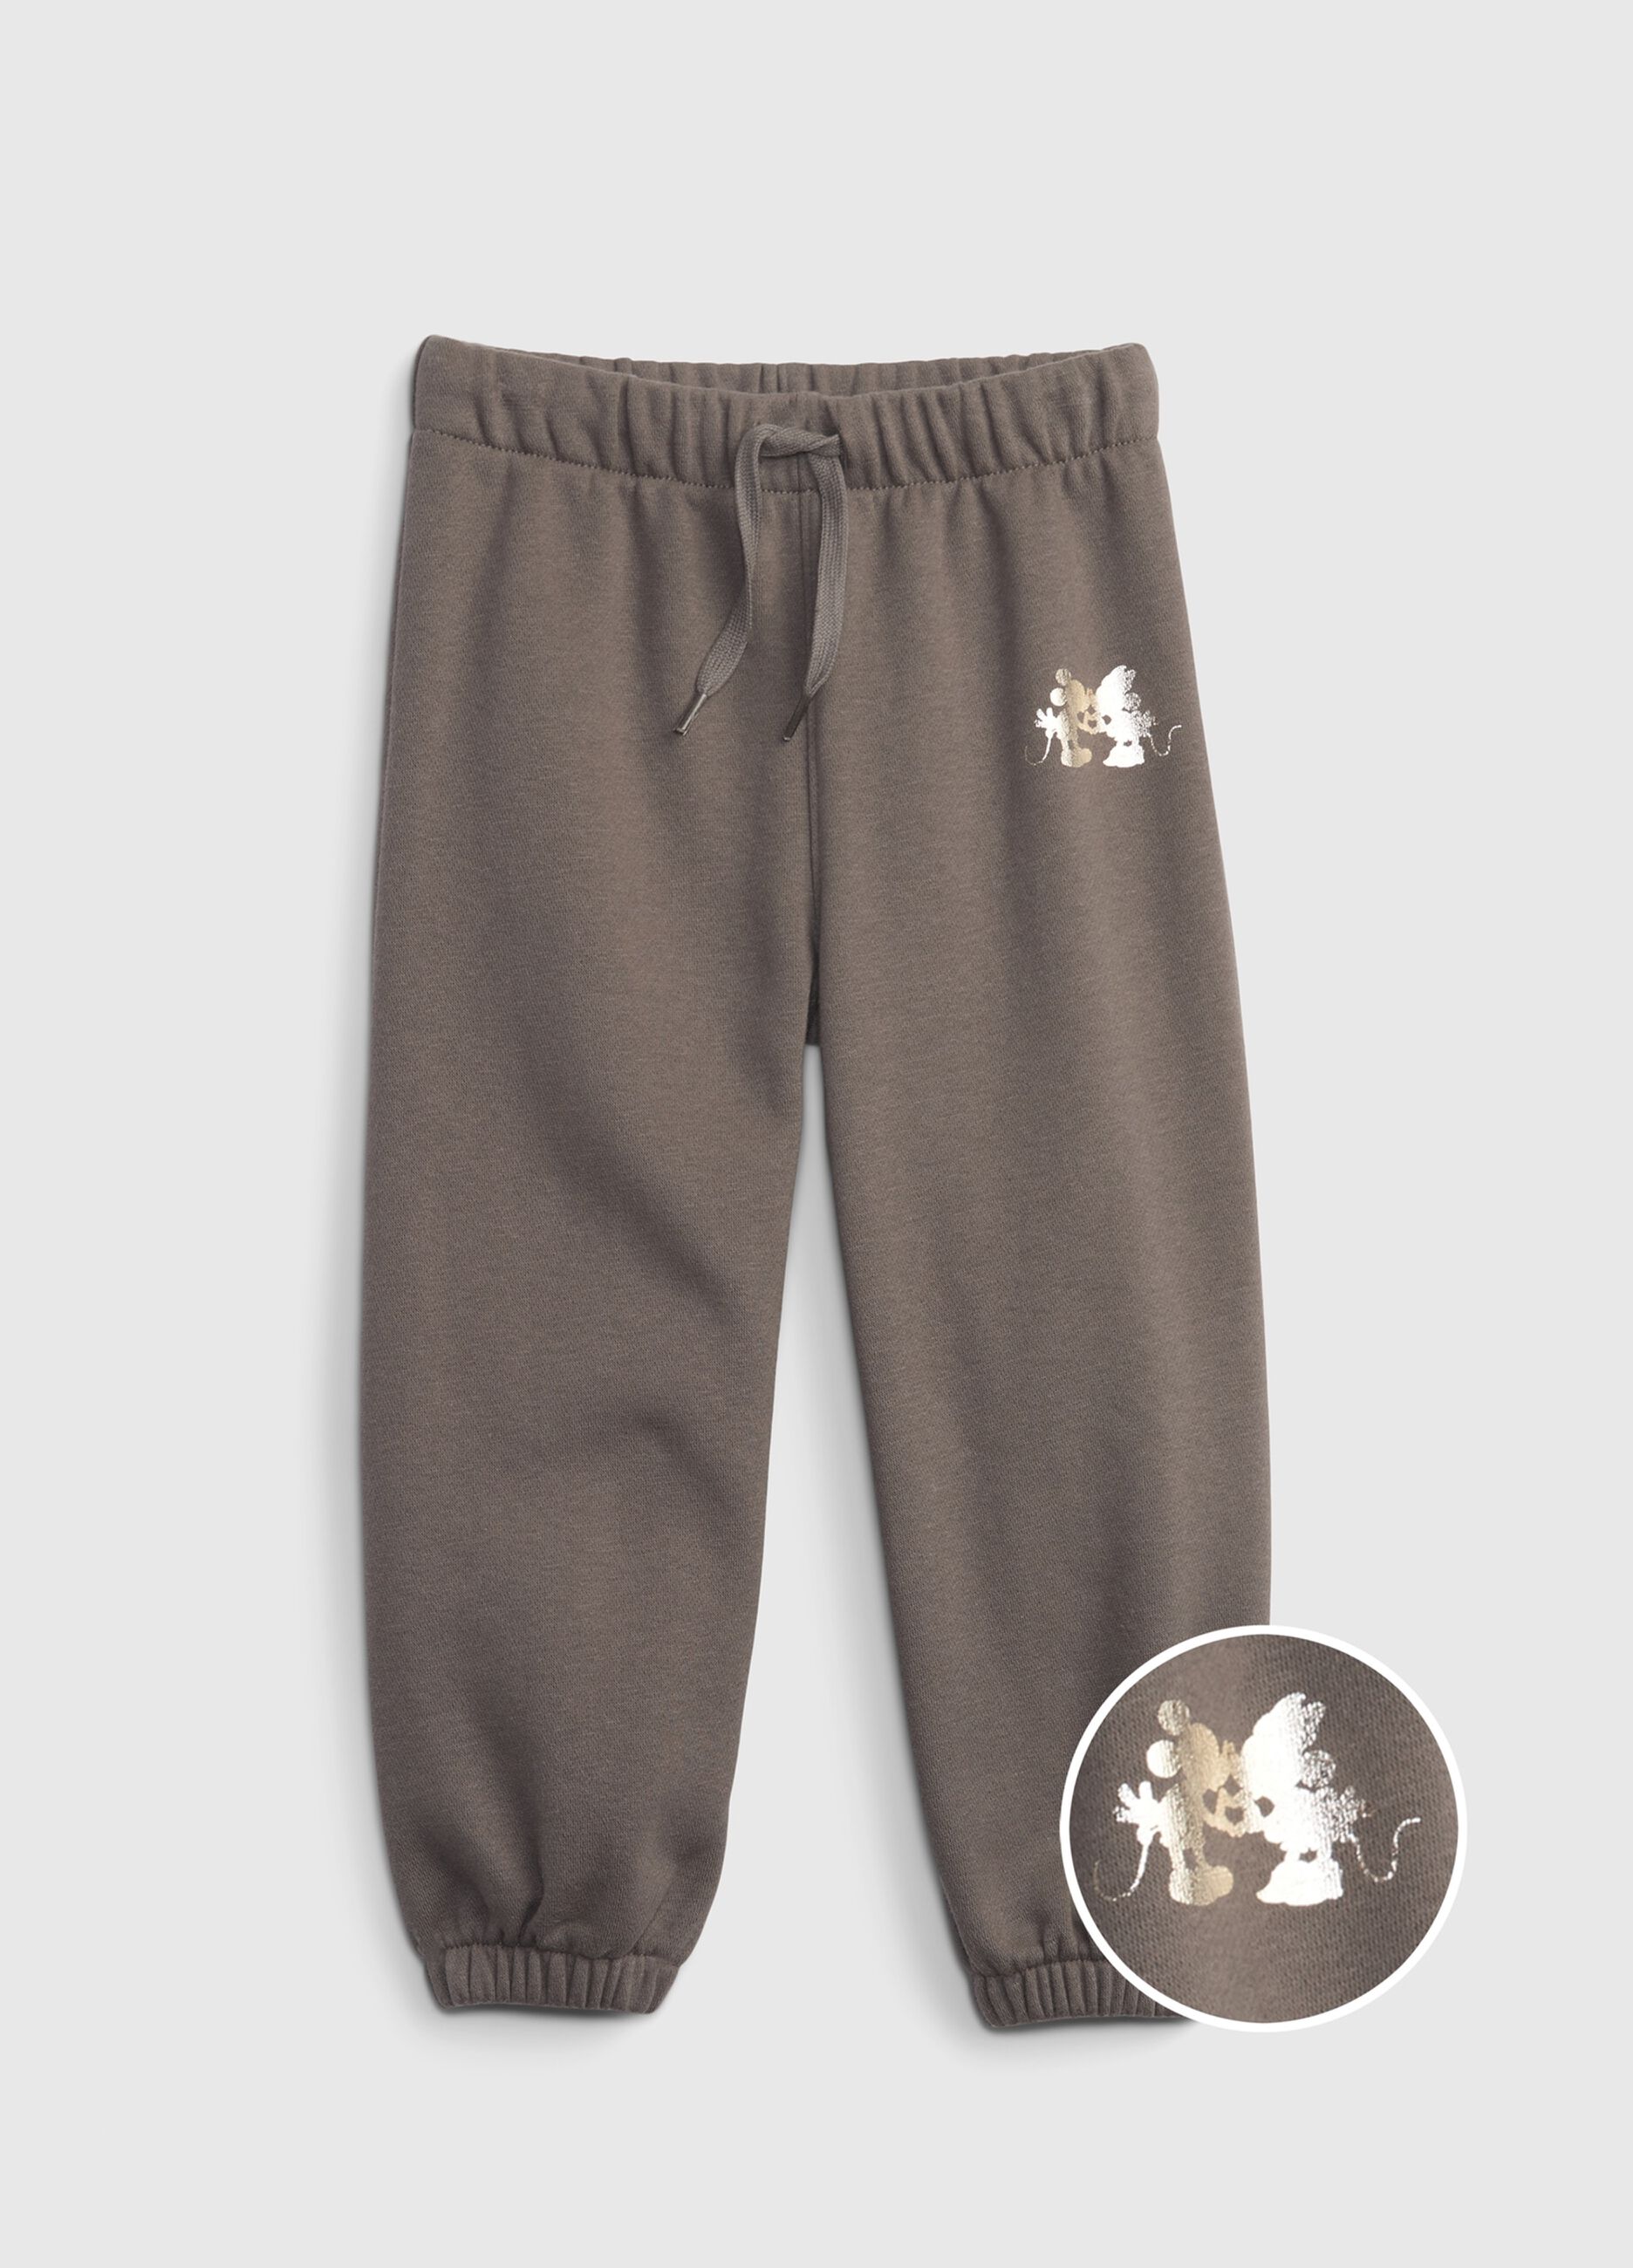 Plush joggers with Minnie and Mickey Mouse print